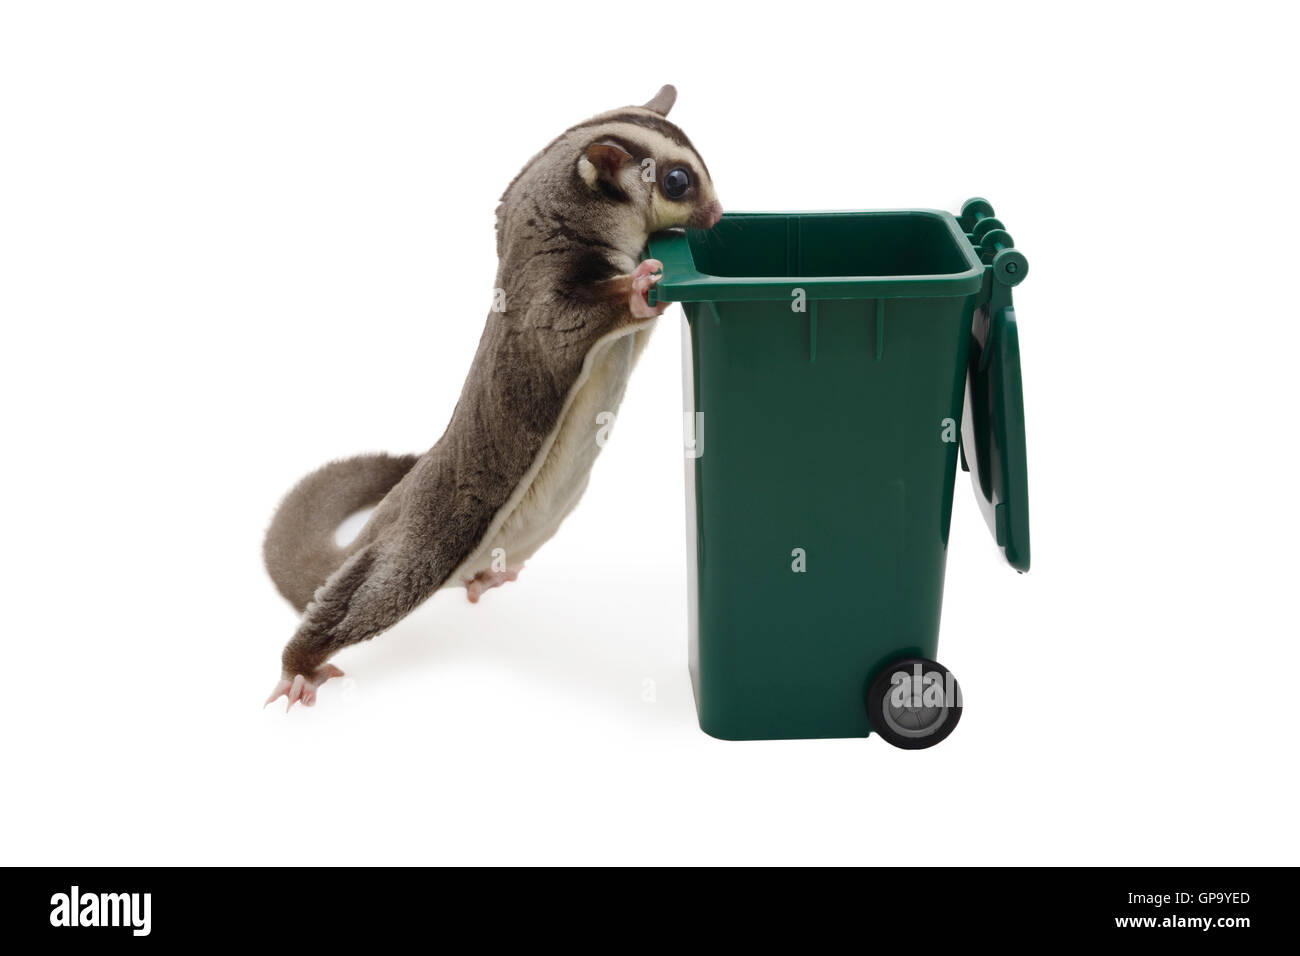 Sugarglider standing and look in to green garbage bin on white background. Stock Photo